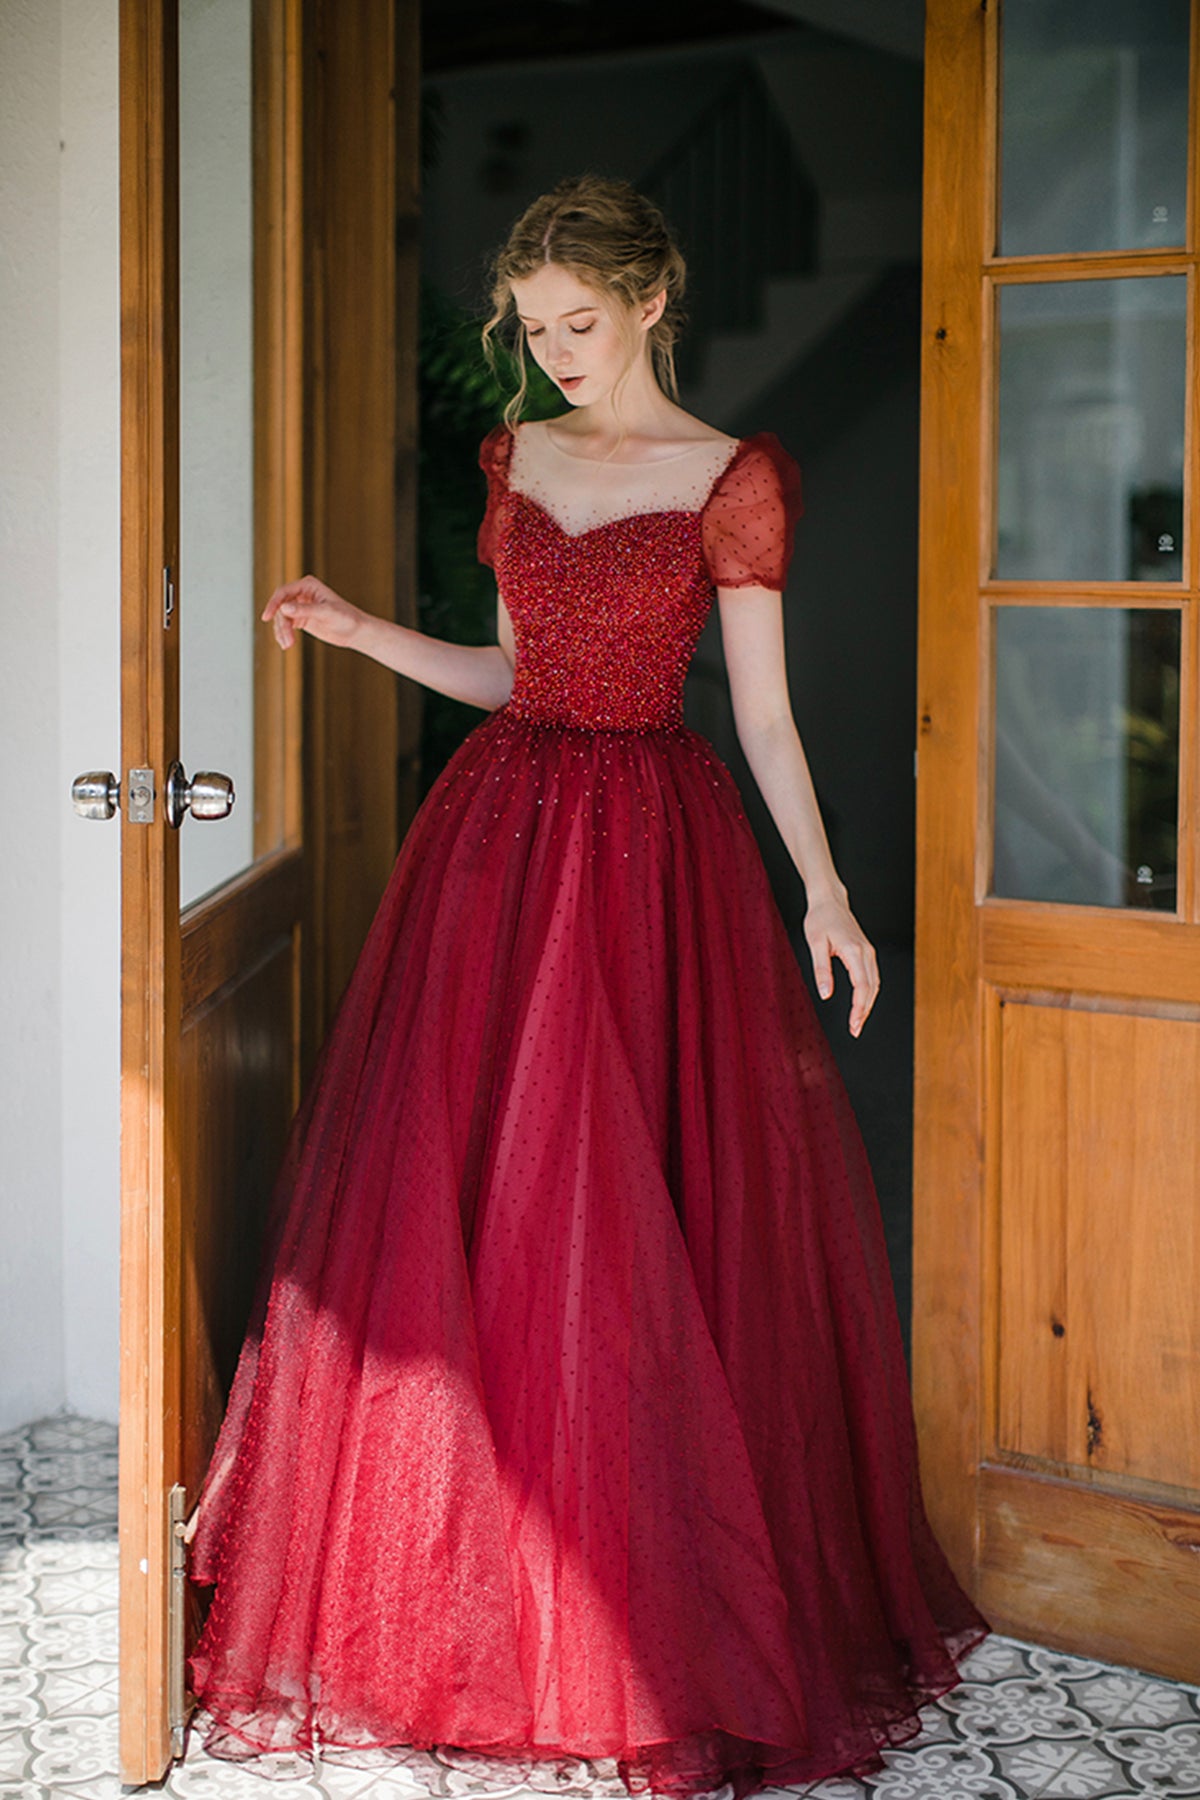 Burgundy Tulle Long Prom Dress with Sequins, A-Line Formal Evening Dress